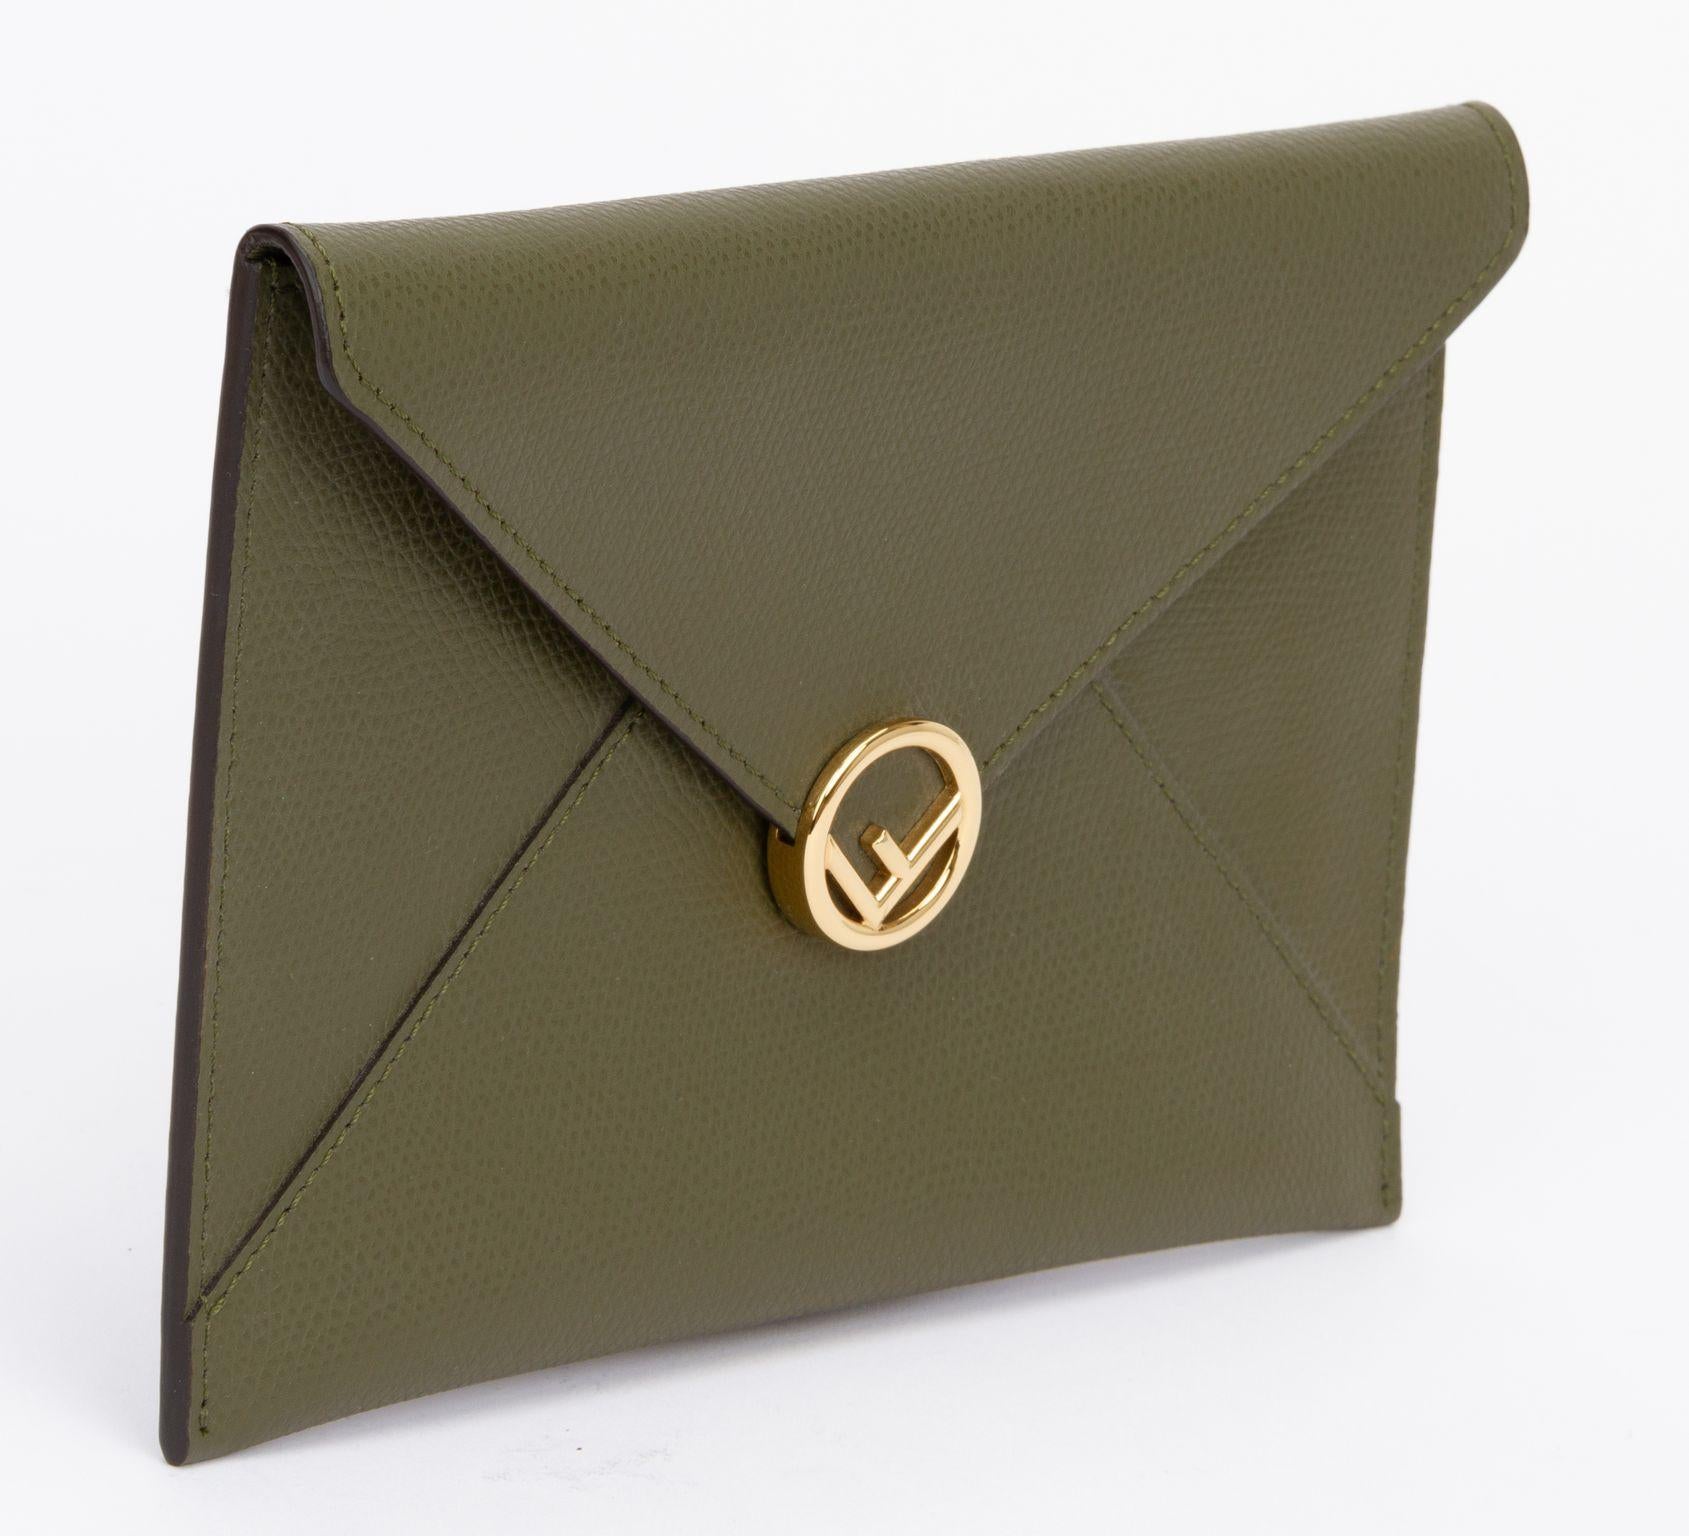 Fendi Calfskin medium flat envelope pouch in olive green. This pouch is made of textured calfskin leather. The top envelope flap snaps open to a matching leather interior. It closes with a push button which is gold and shows a circled F. The piece